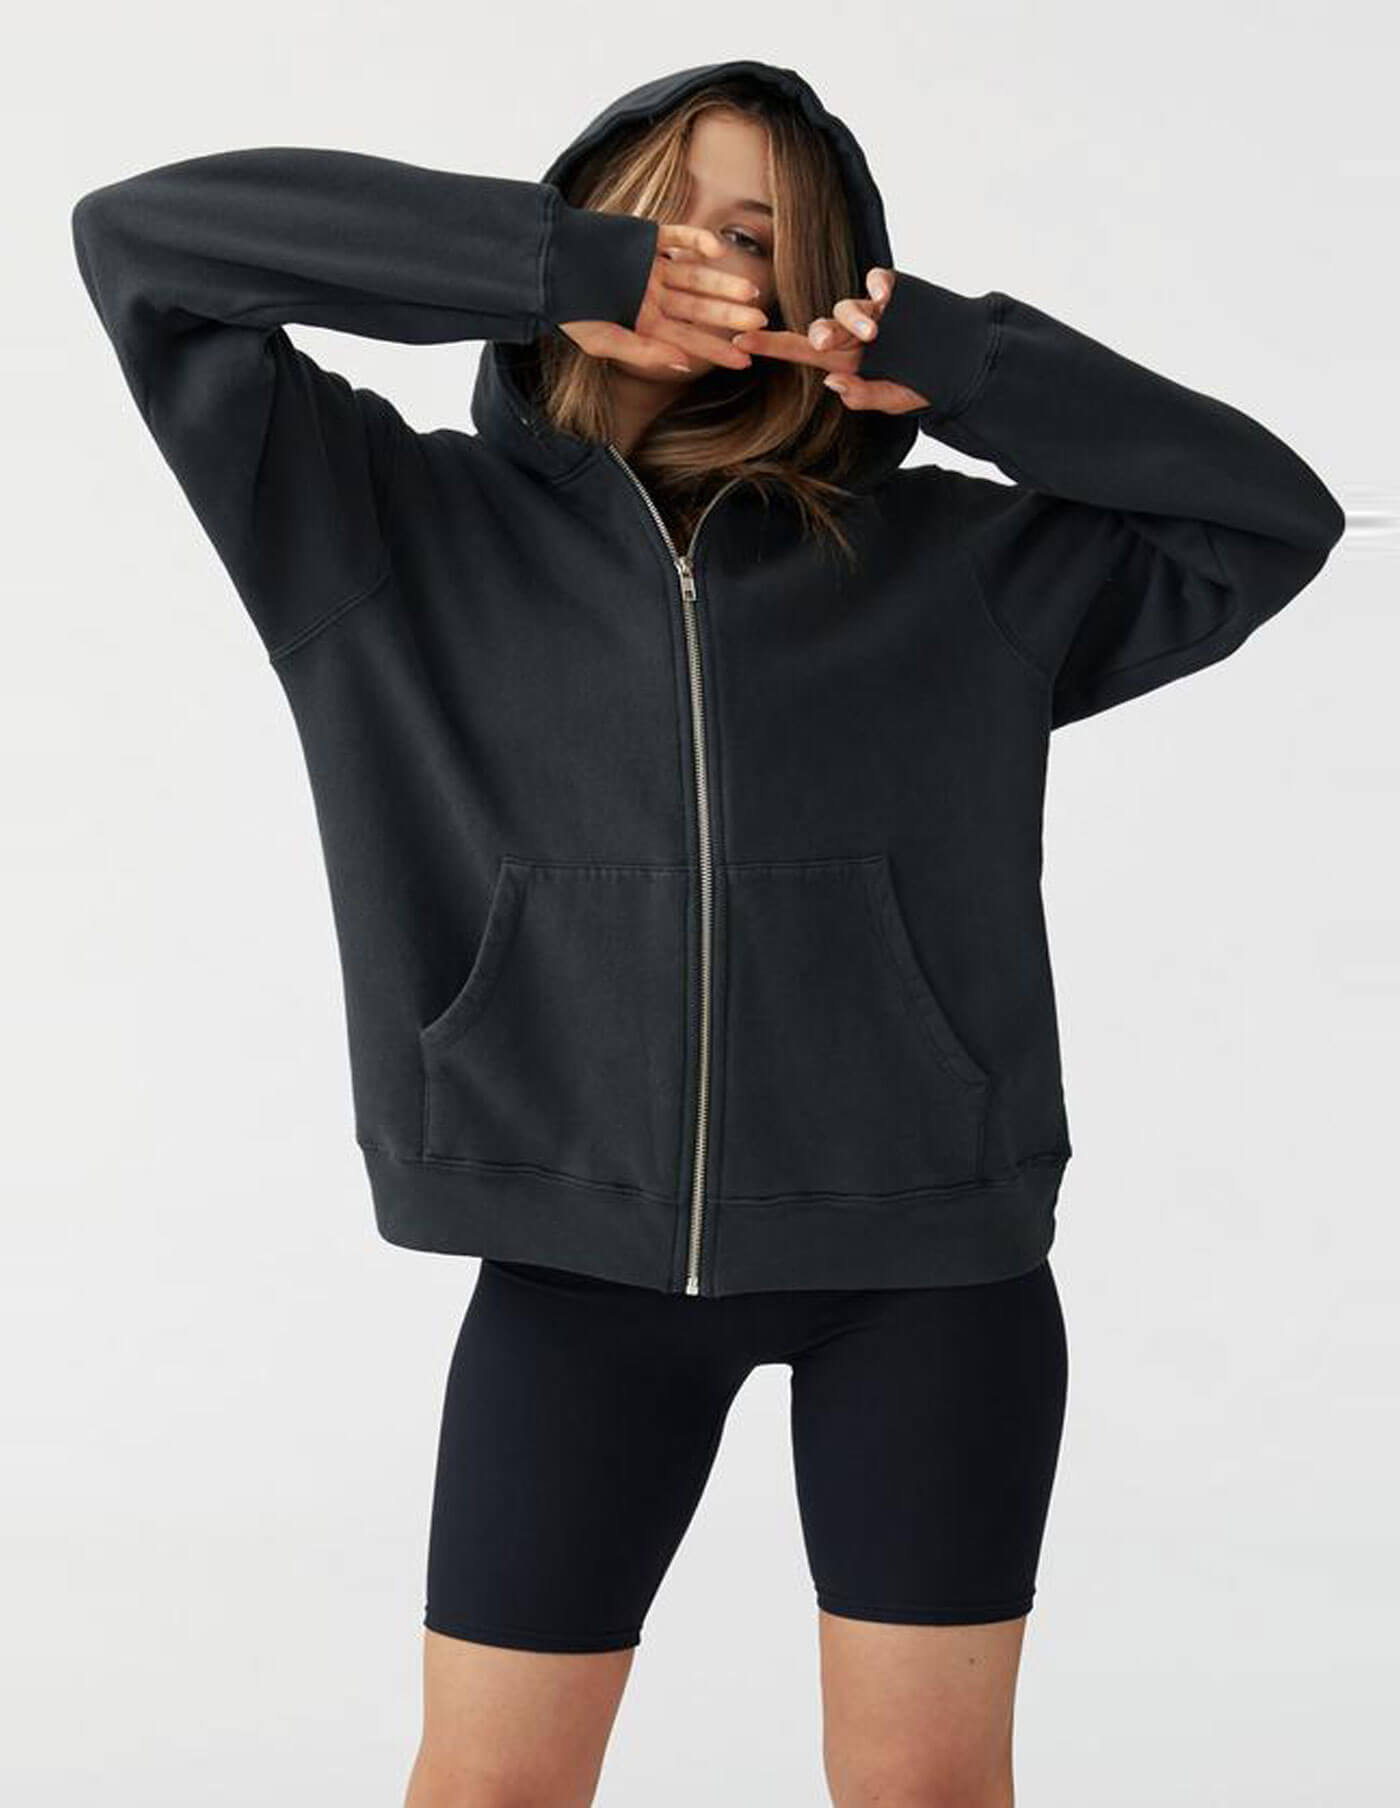 Joah Brown Empire Zip Hoodie In Charcoal at Storm Fashion